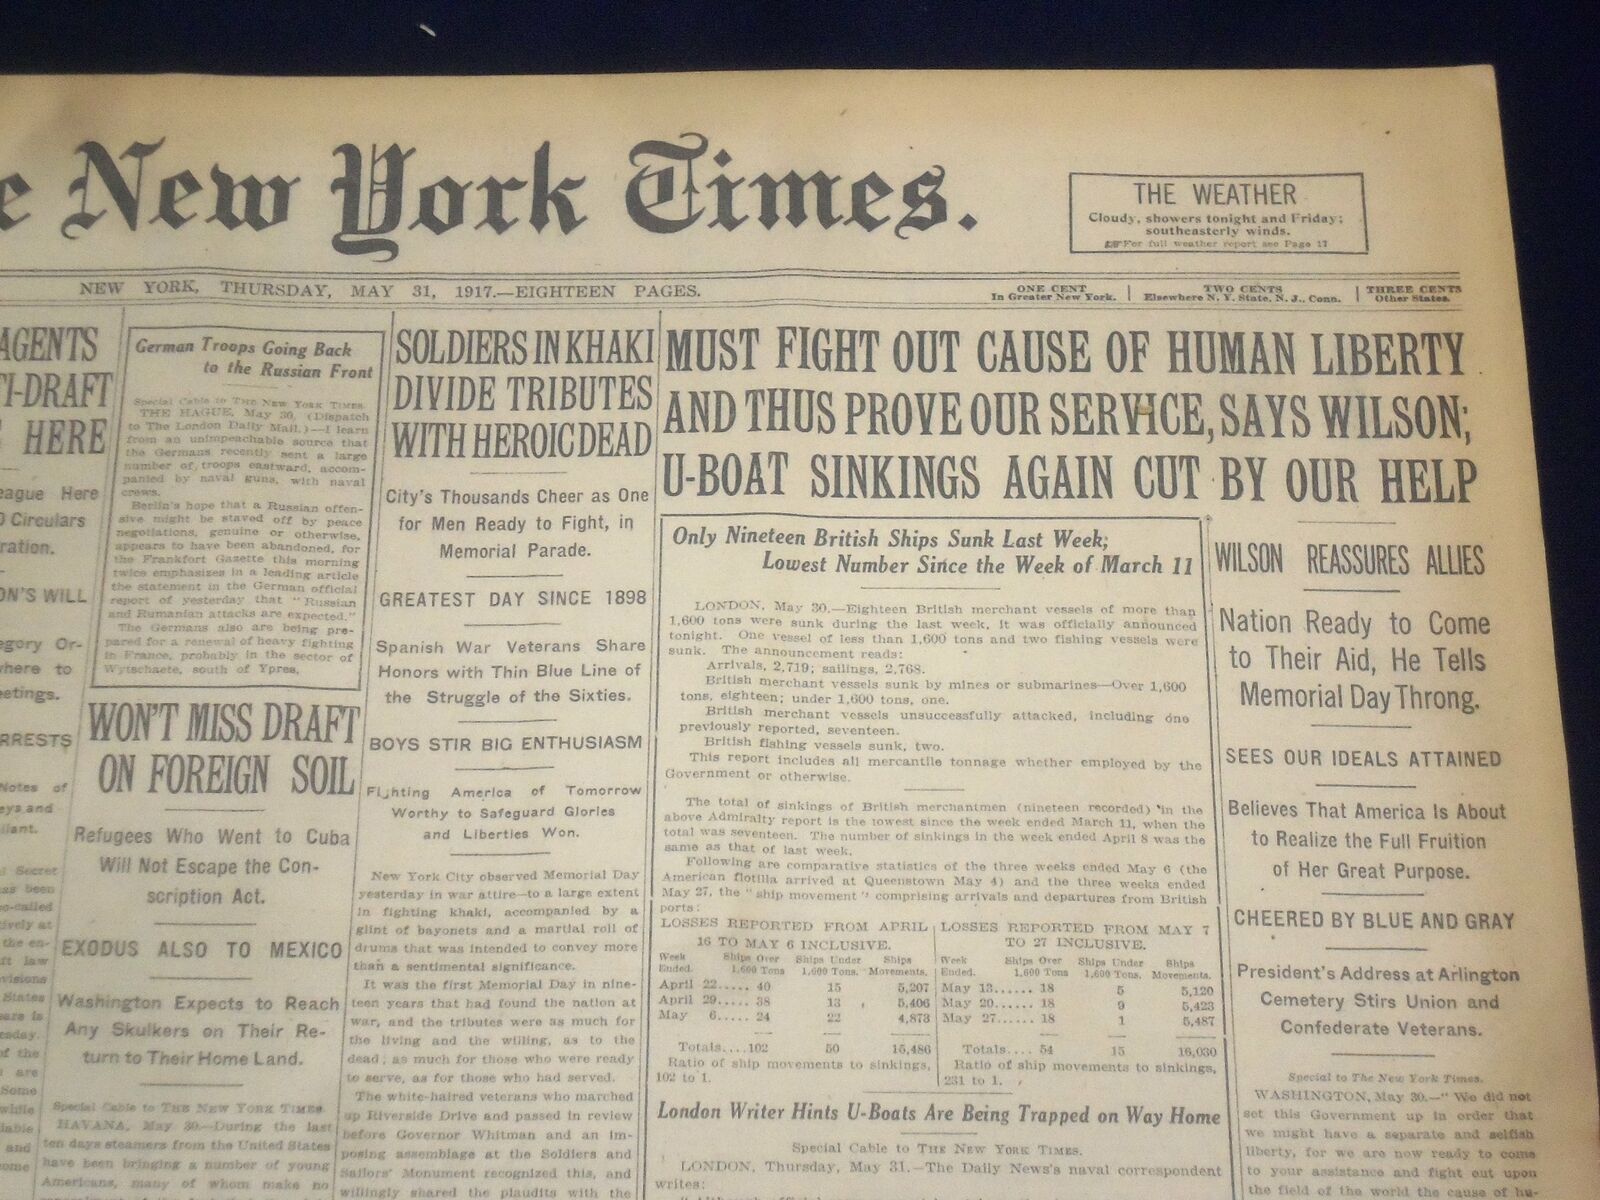 1917 MAY 31 NEW YORK TIMES - MUST FIGHT OUR CAUSE OF HUMAN LIBERTY - NT 9143